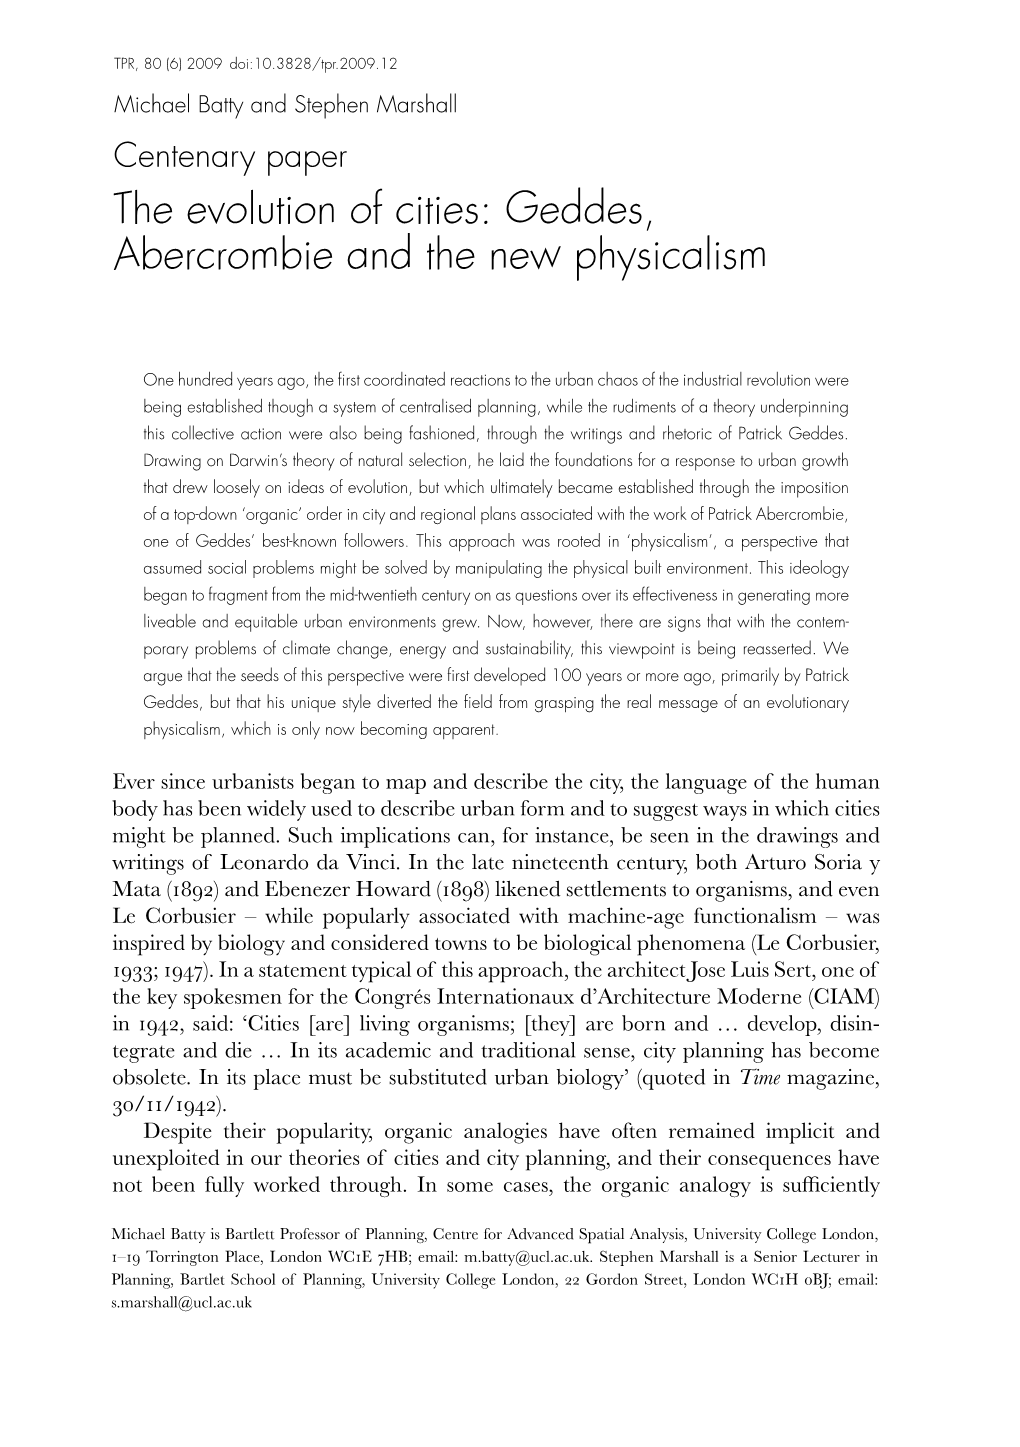 The Evolution of Cities: Geddes, Abercrombie and the New Physicalism